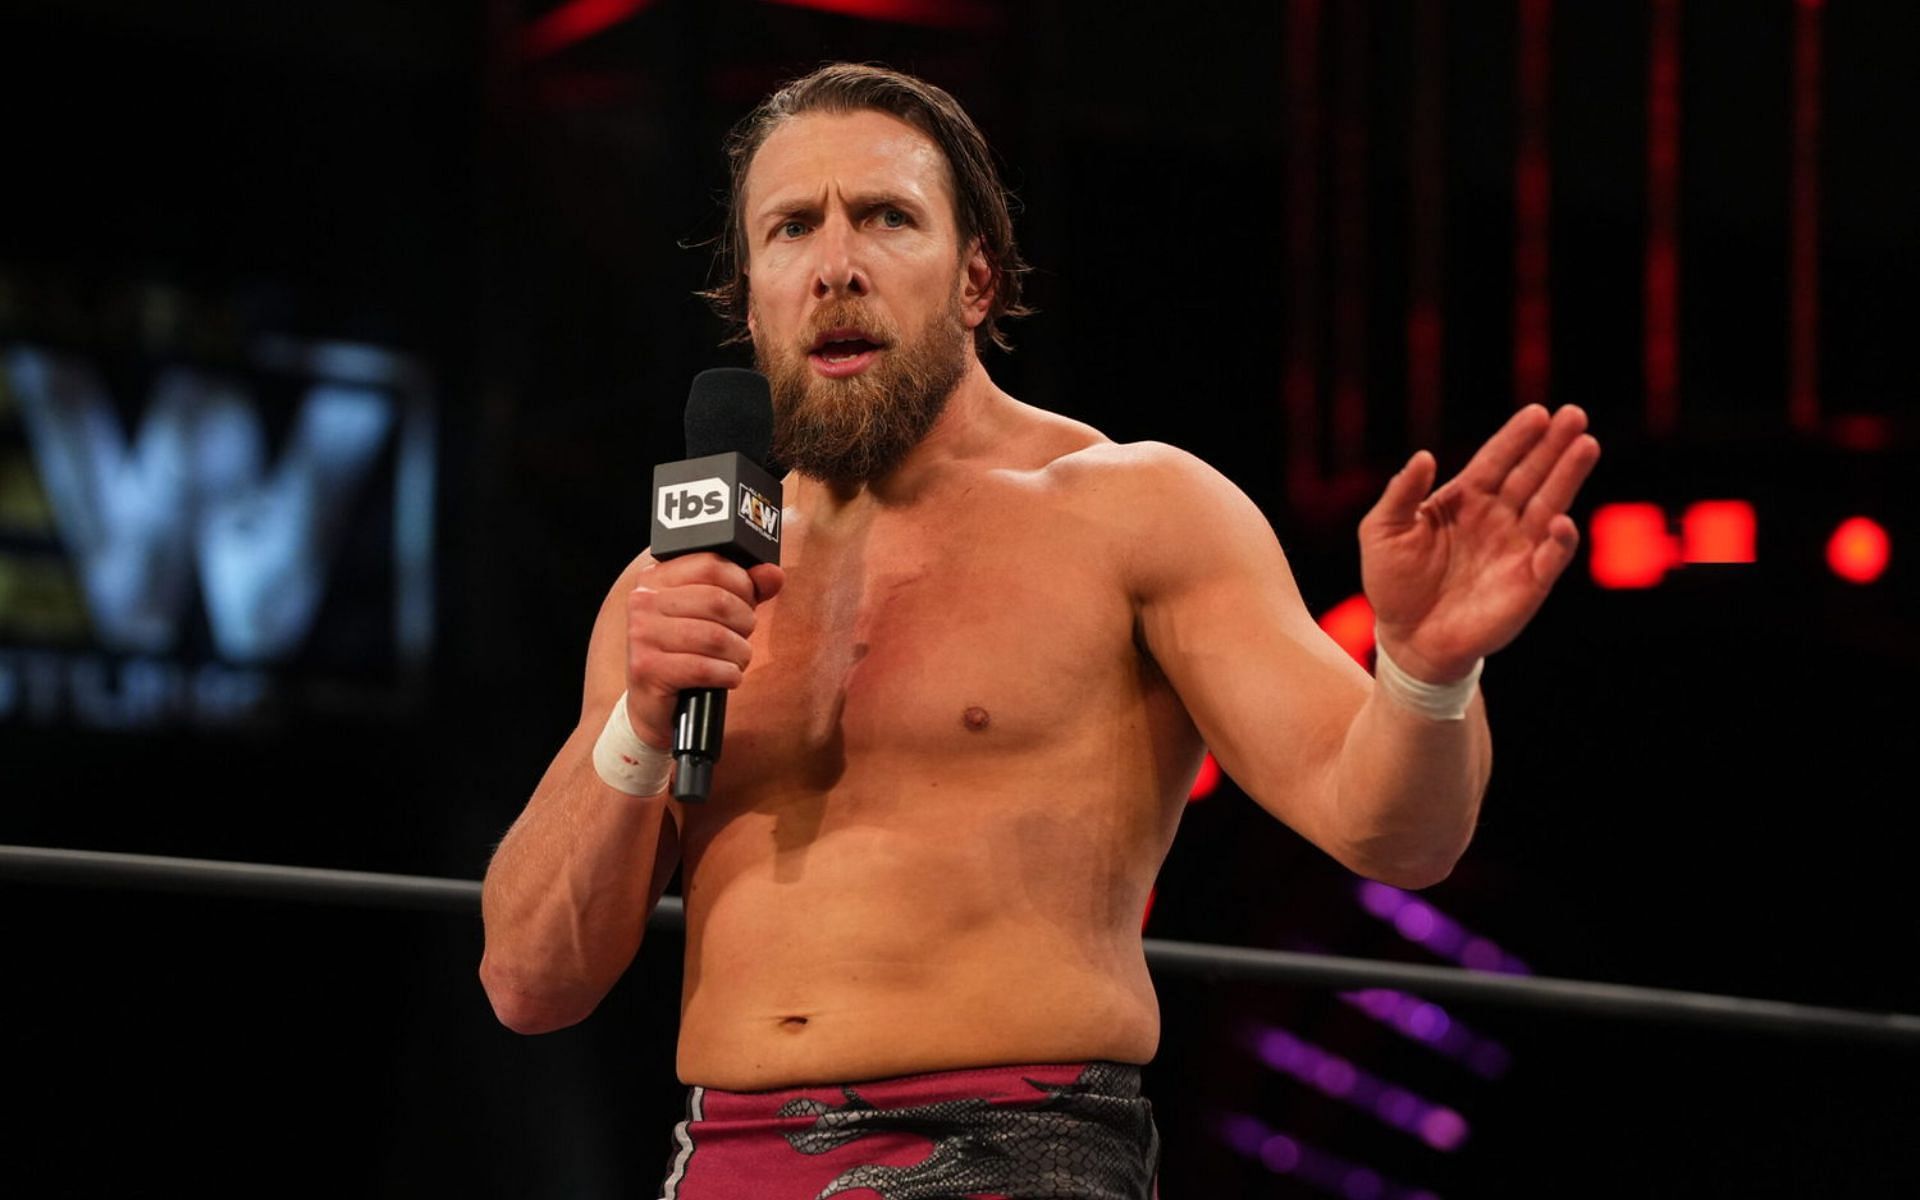 Former WWE personality expresses frustration with AEW star Bryan Danielson